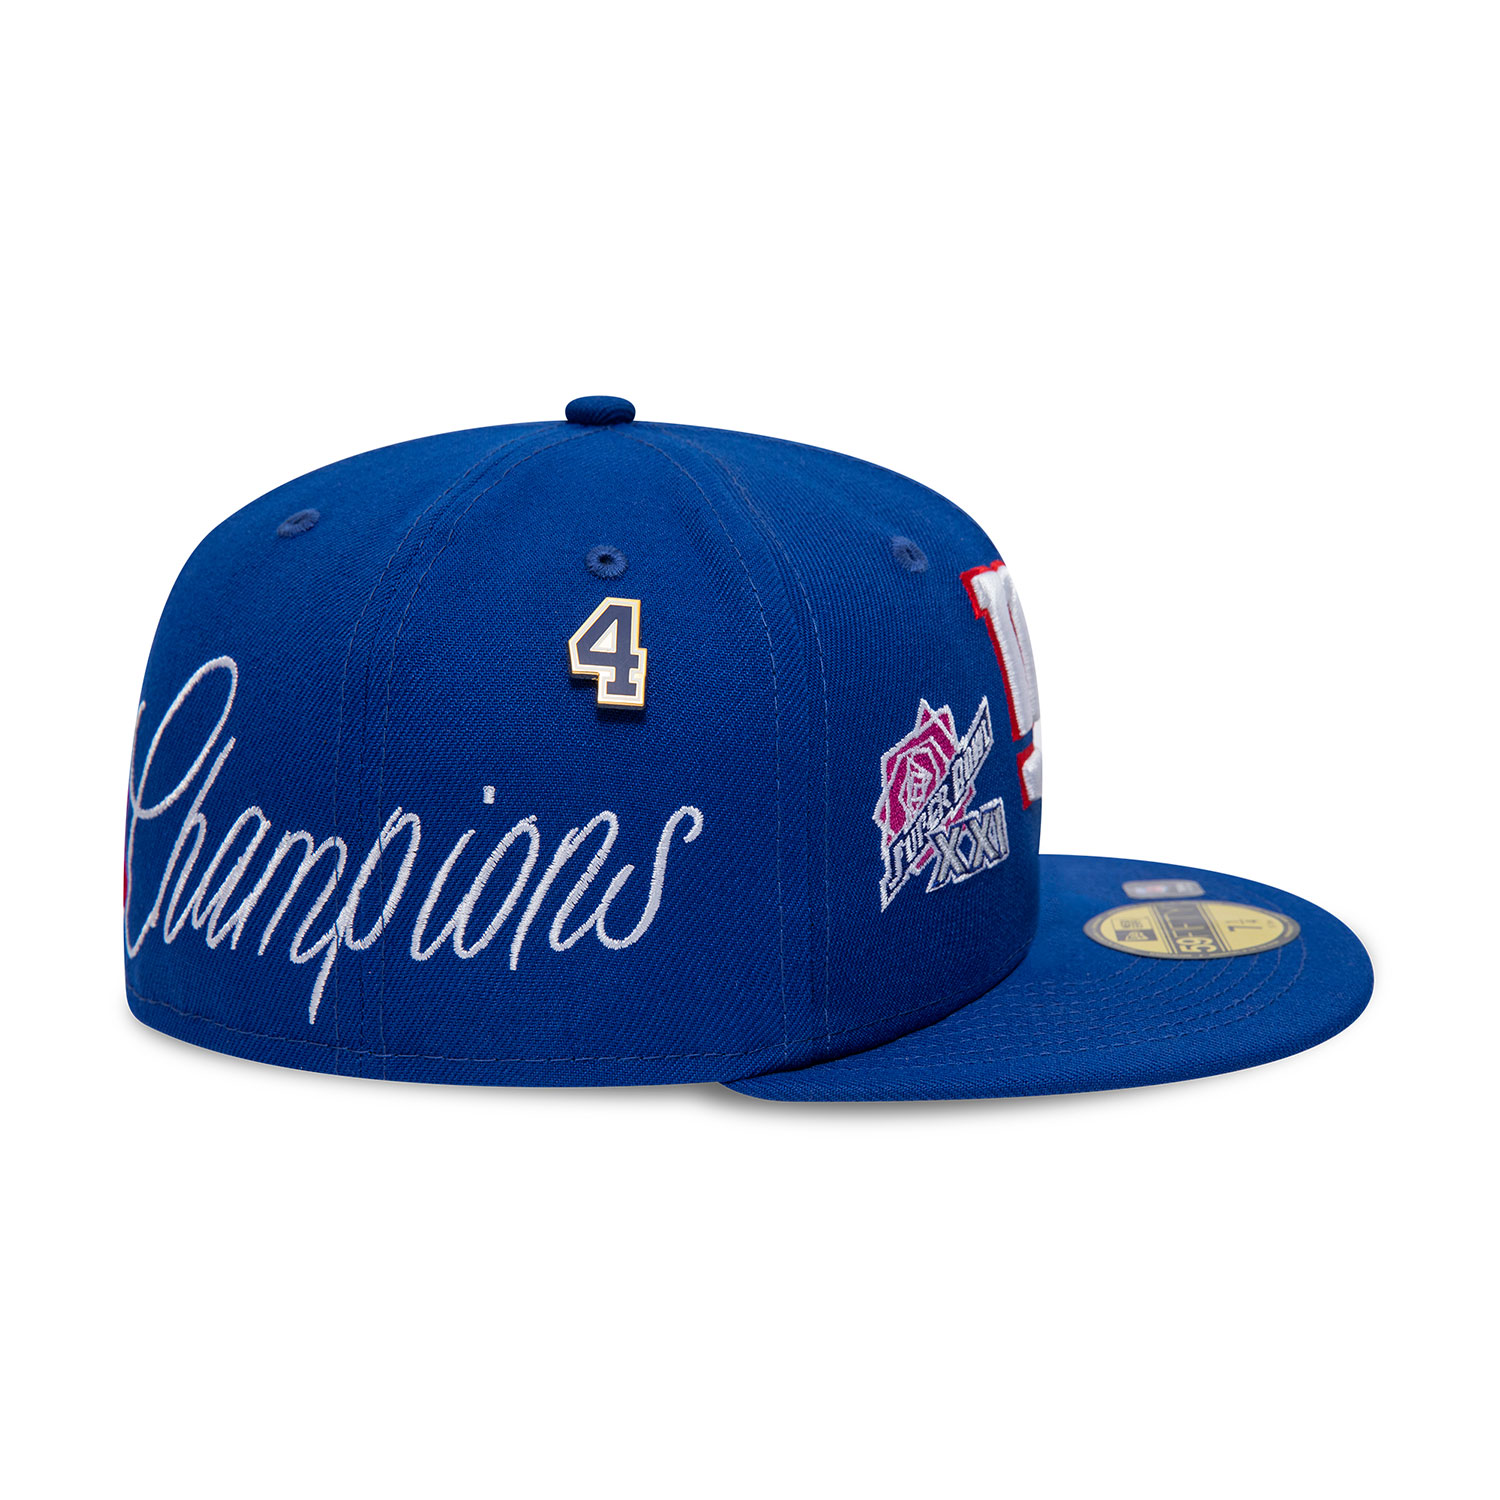 New York Giants Historic Champs Blue 59FIFTY Fitted Cap